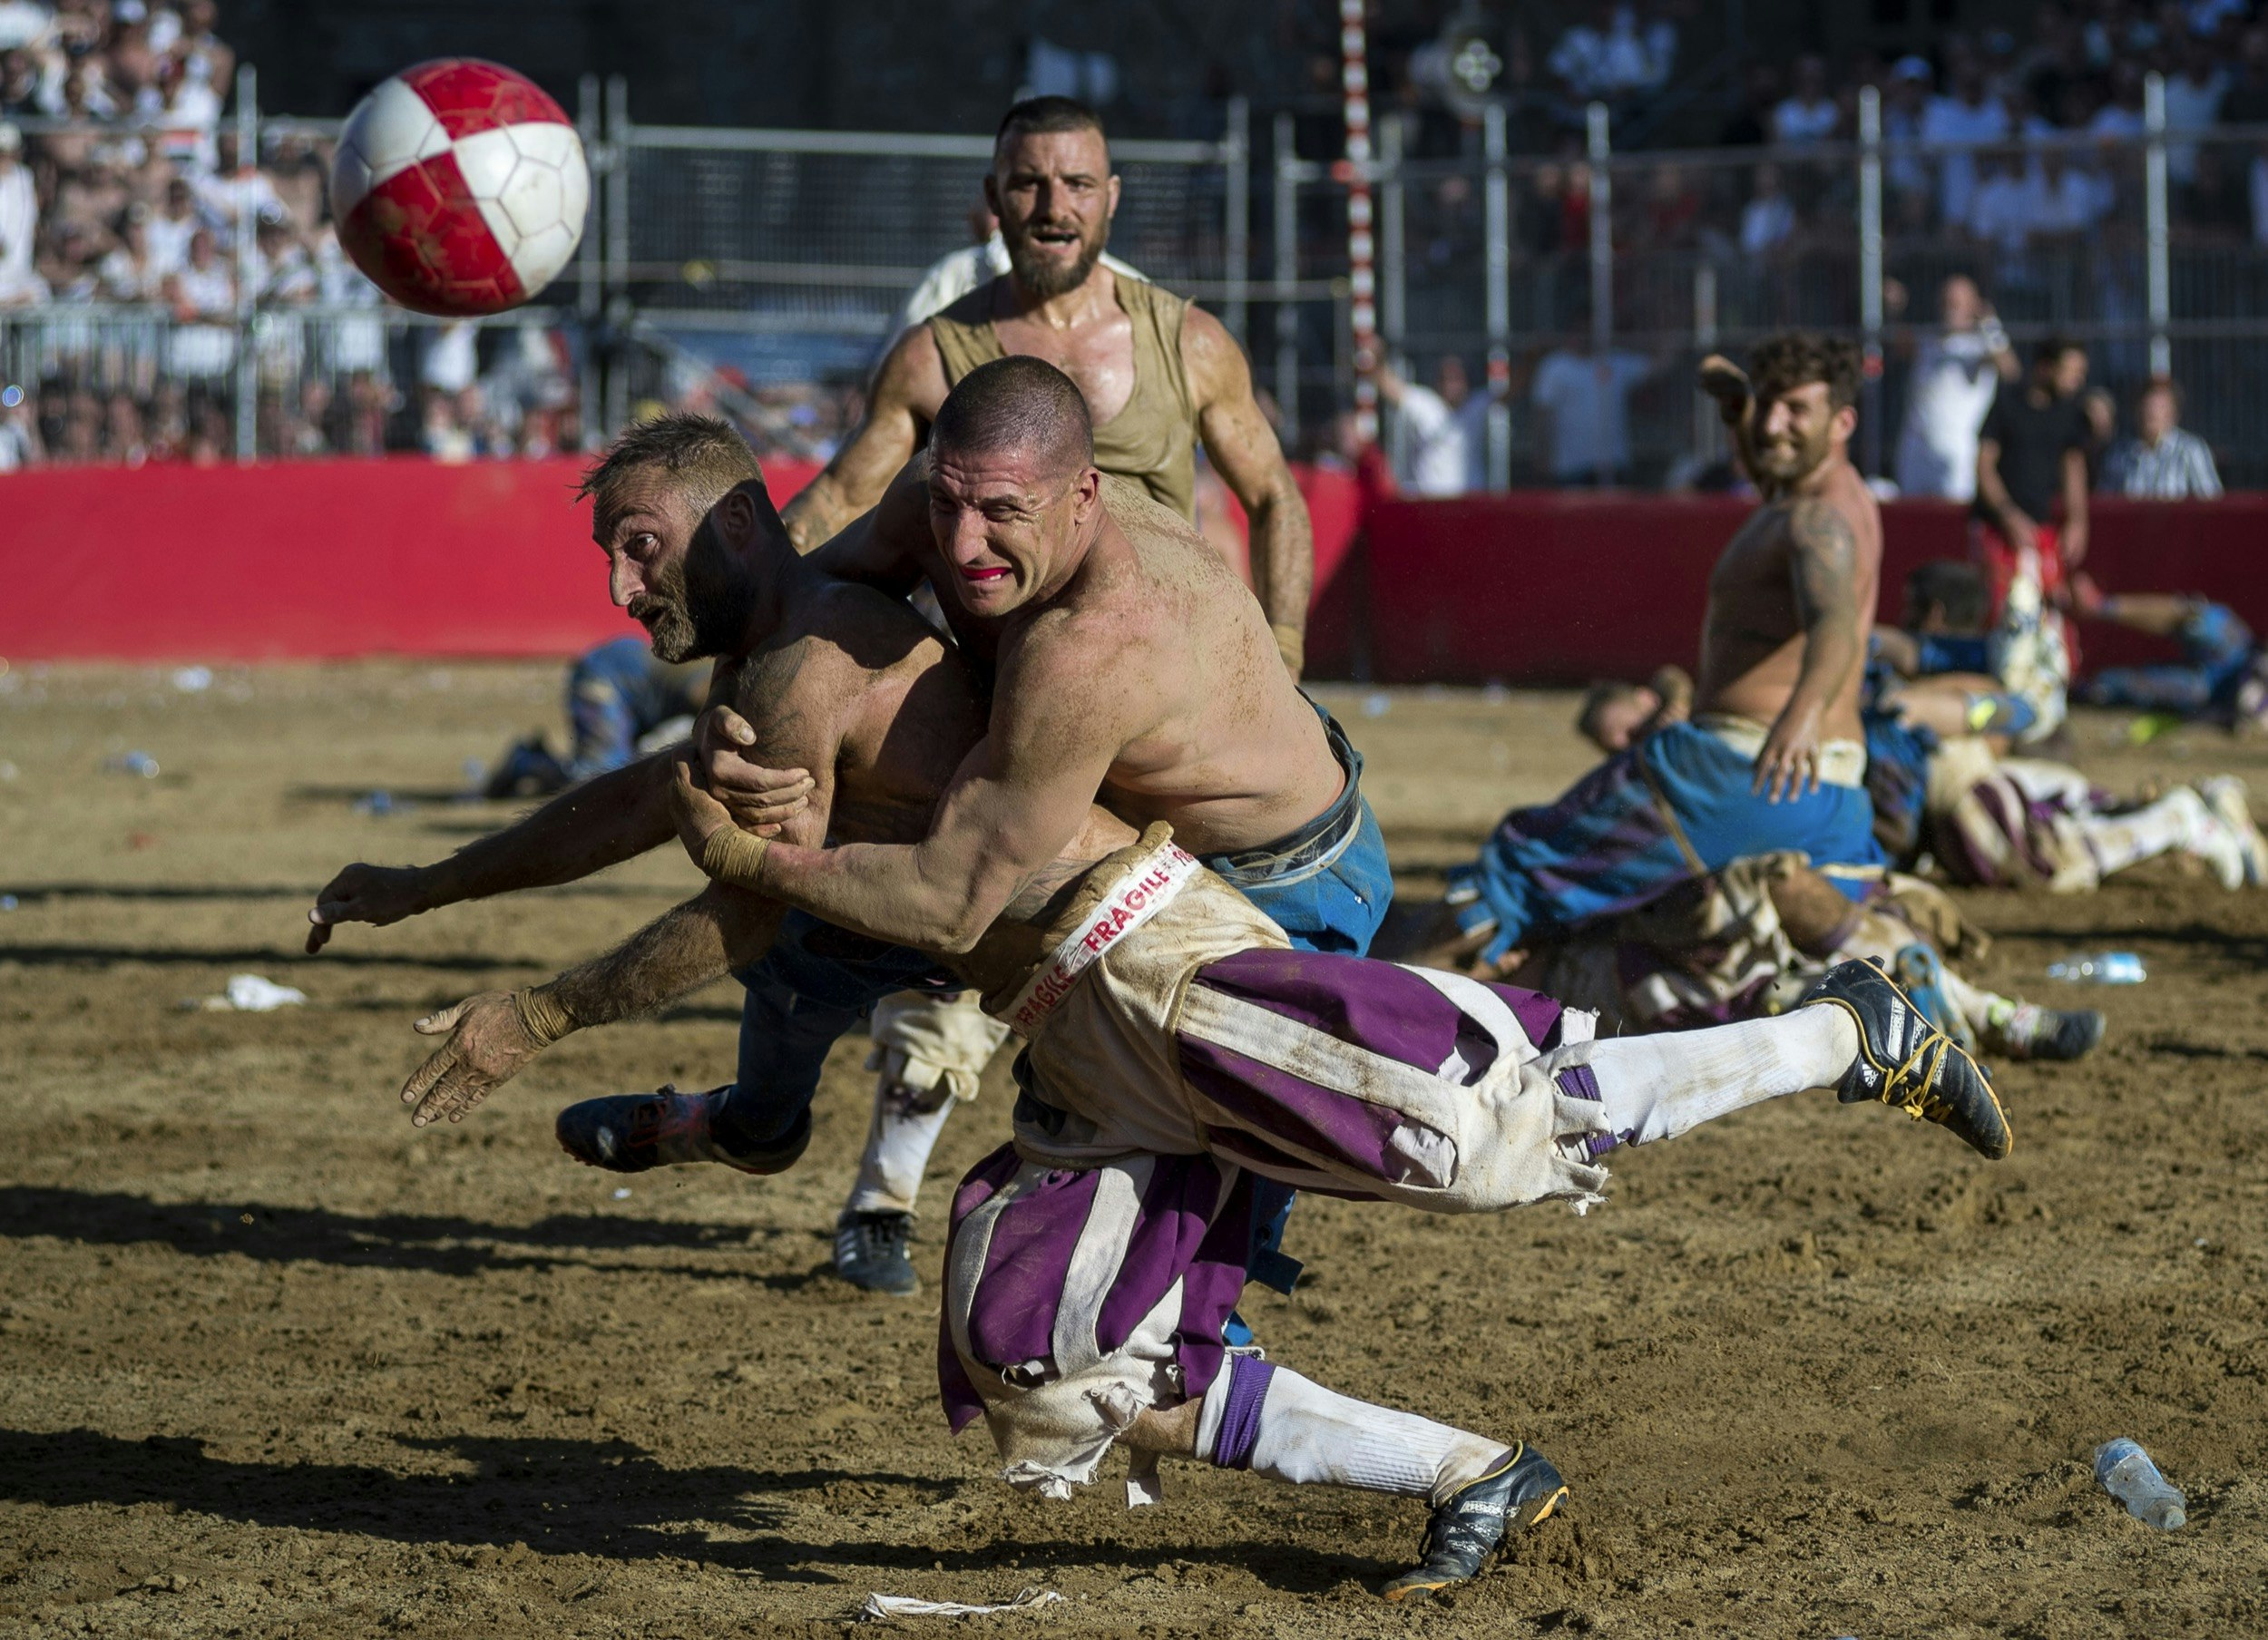 A man is tackled in a muddy arena as both men - and others around them - watch a ball bouncing erratically; unique sporting events